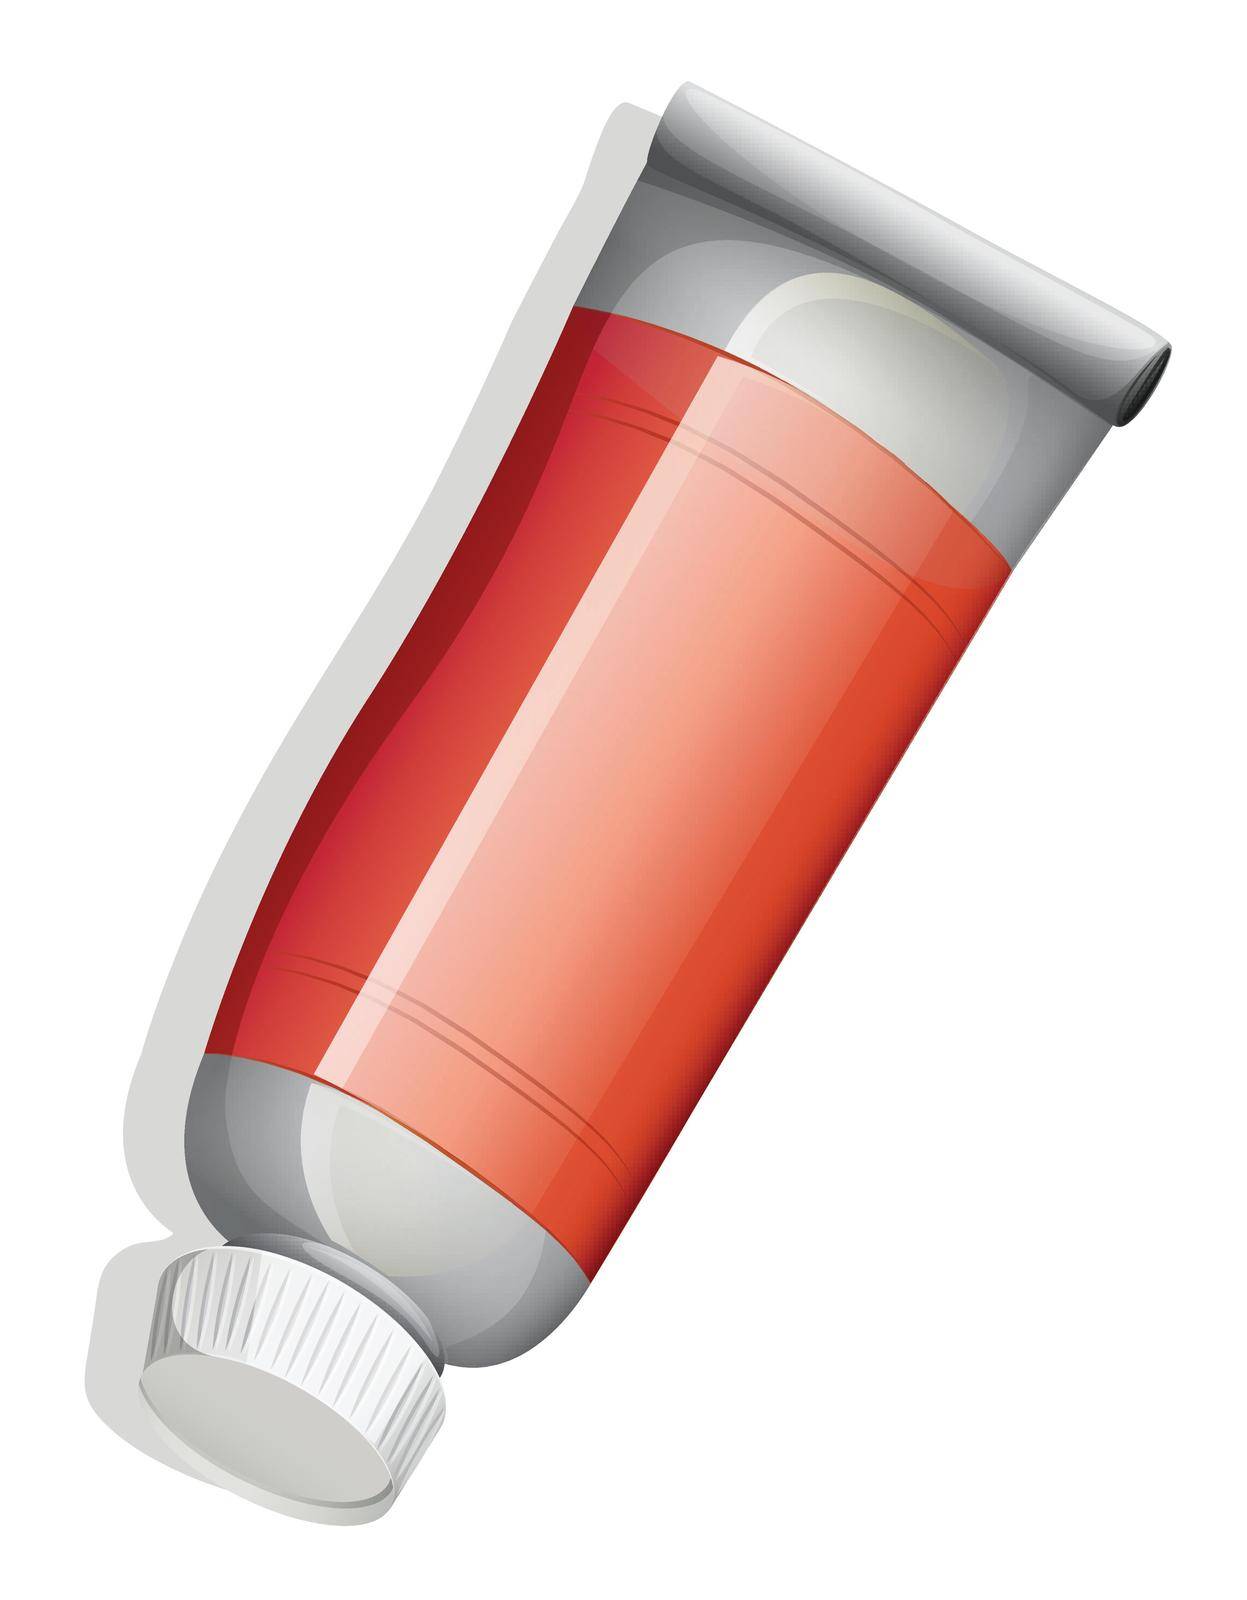 Illustration of a topview of a red tube on a white background